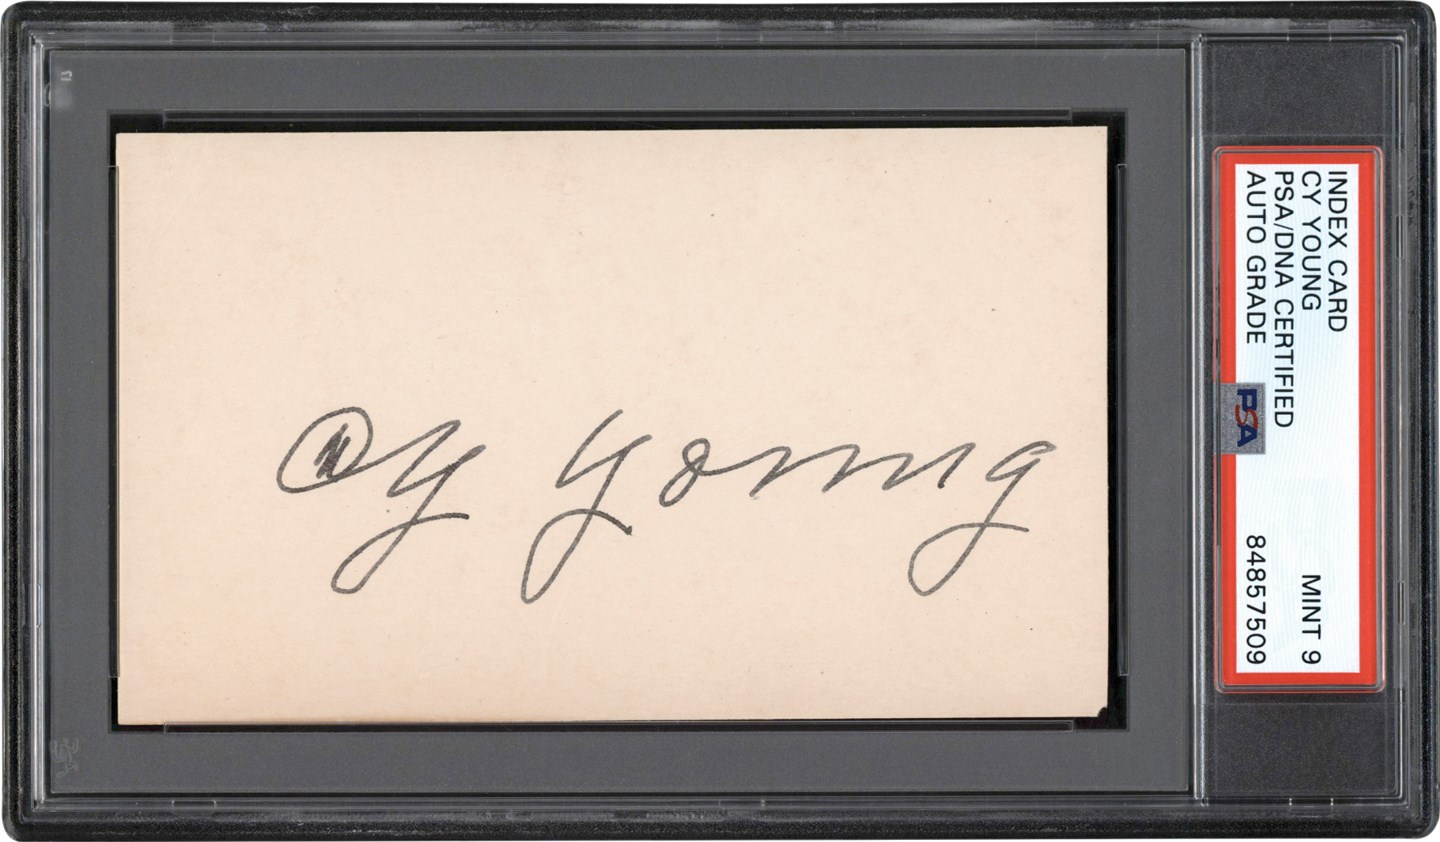 - Cy Young Signed Index Card (PSA MINT 9 Auto)